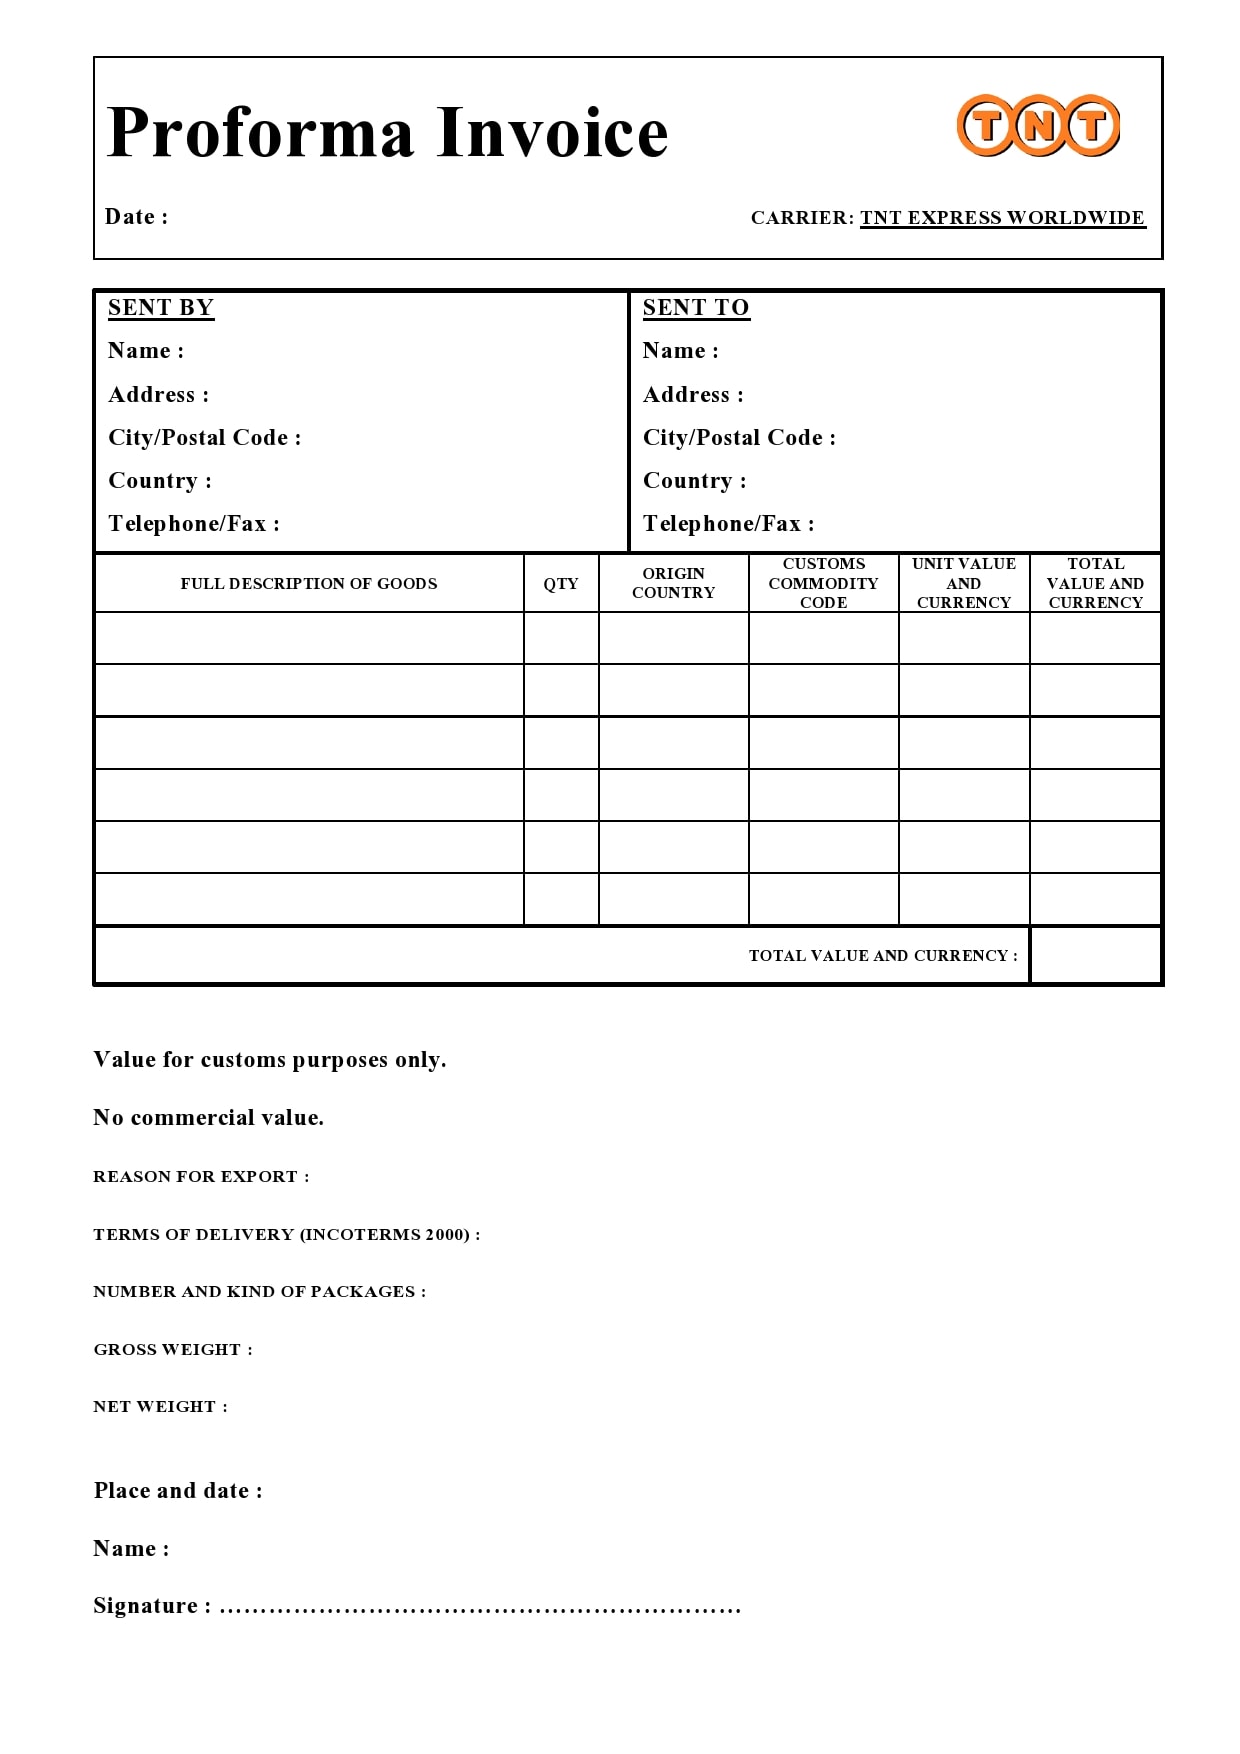 Get Invoice Template Xls Background